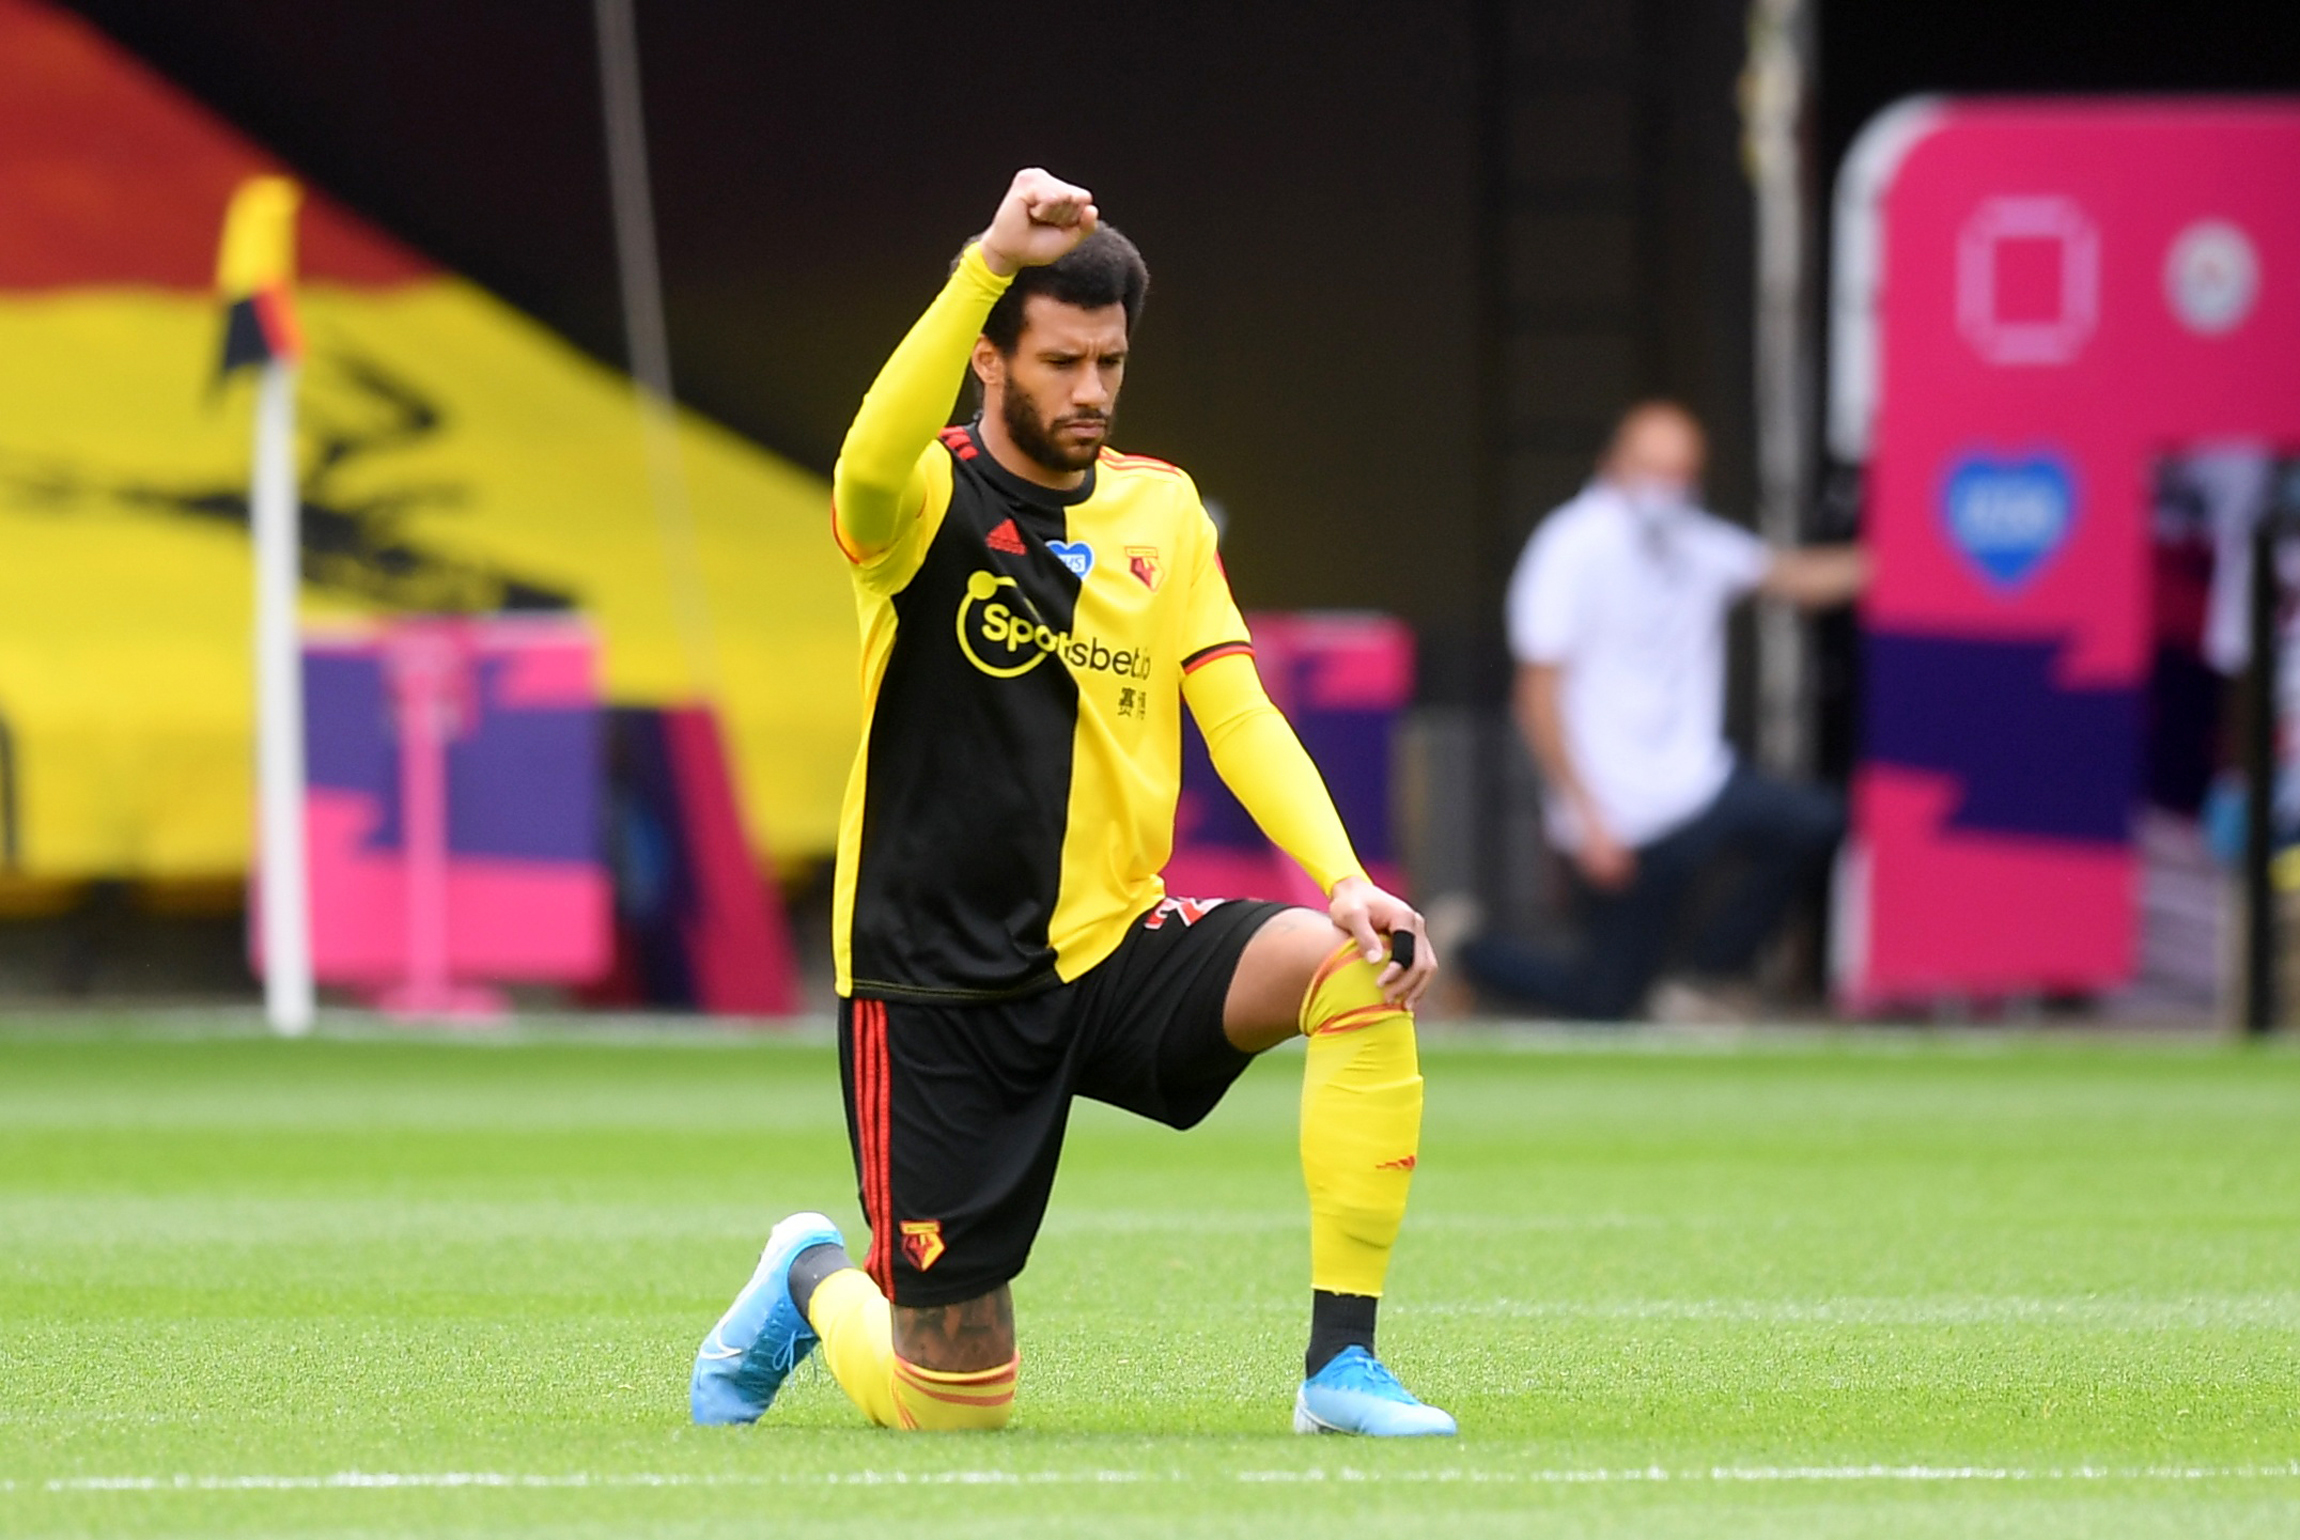 Etienne Capoue will stay with Watford this season